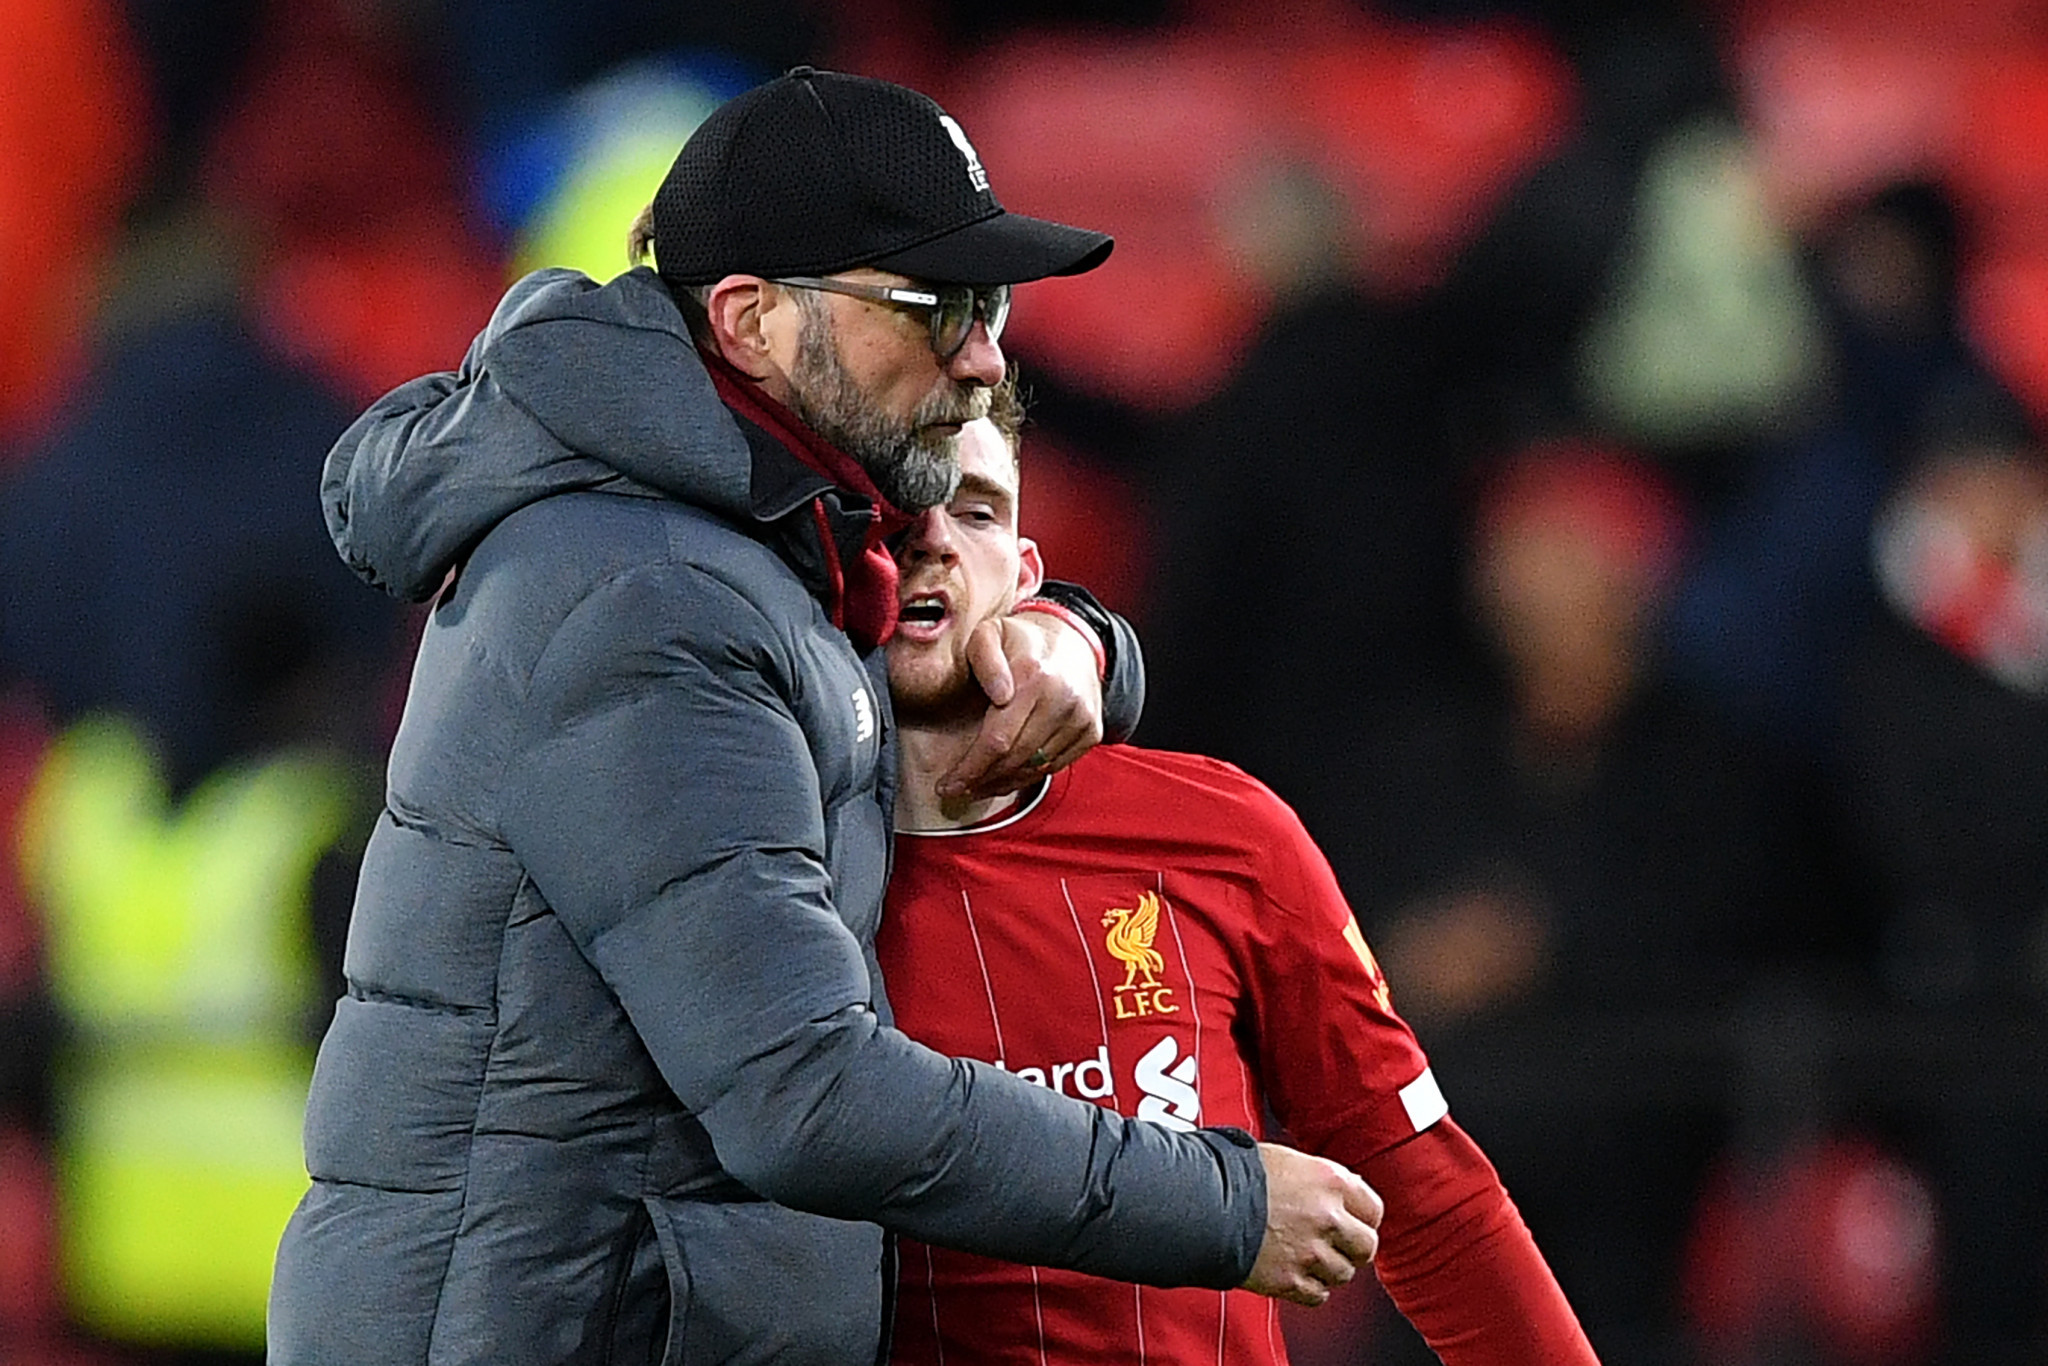 Liverpool manager Jürgen Klopp embraces defender Andrew Roberston after his side's shock 3-0 Premier League defeat at Watford on Saturday ©Getty Images